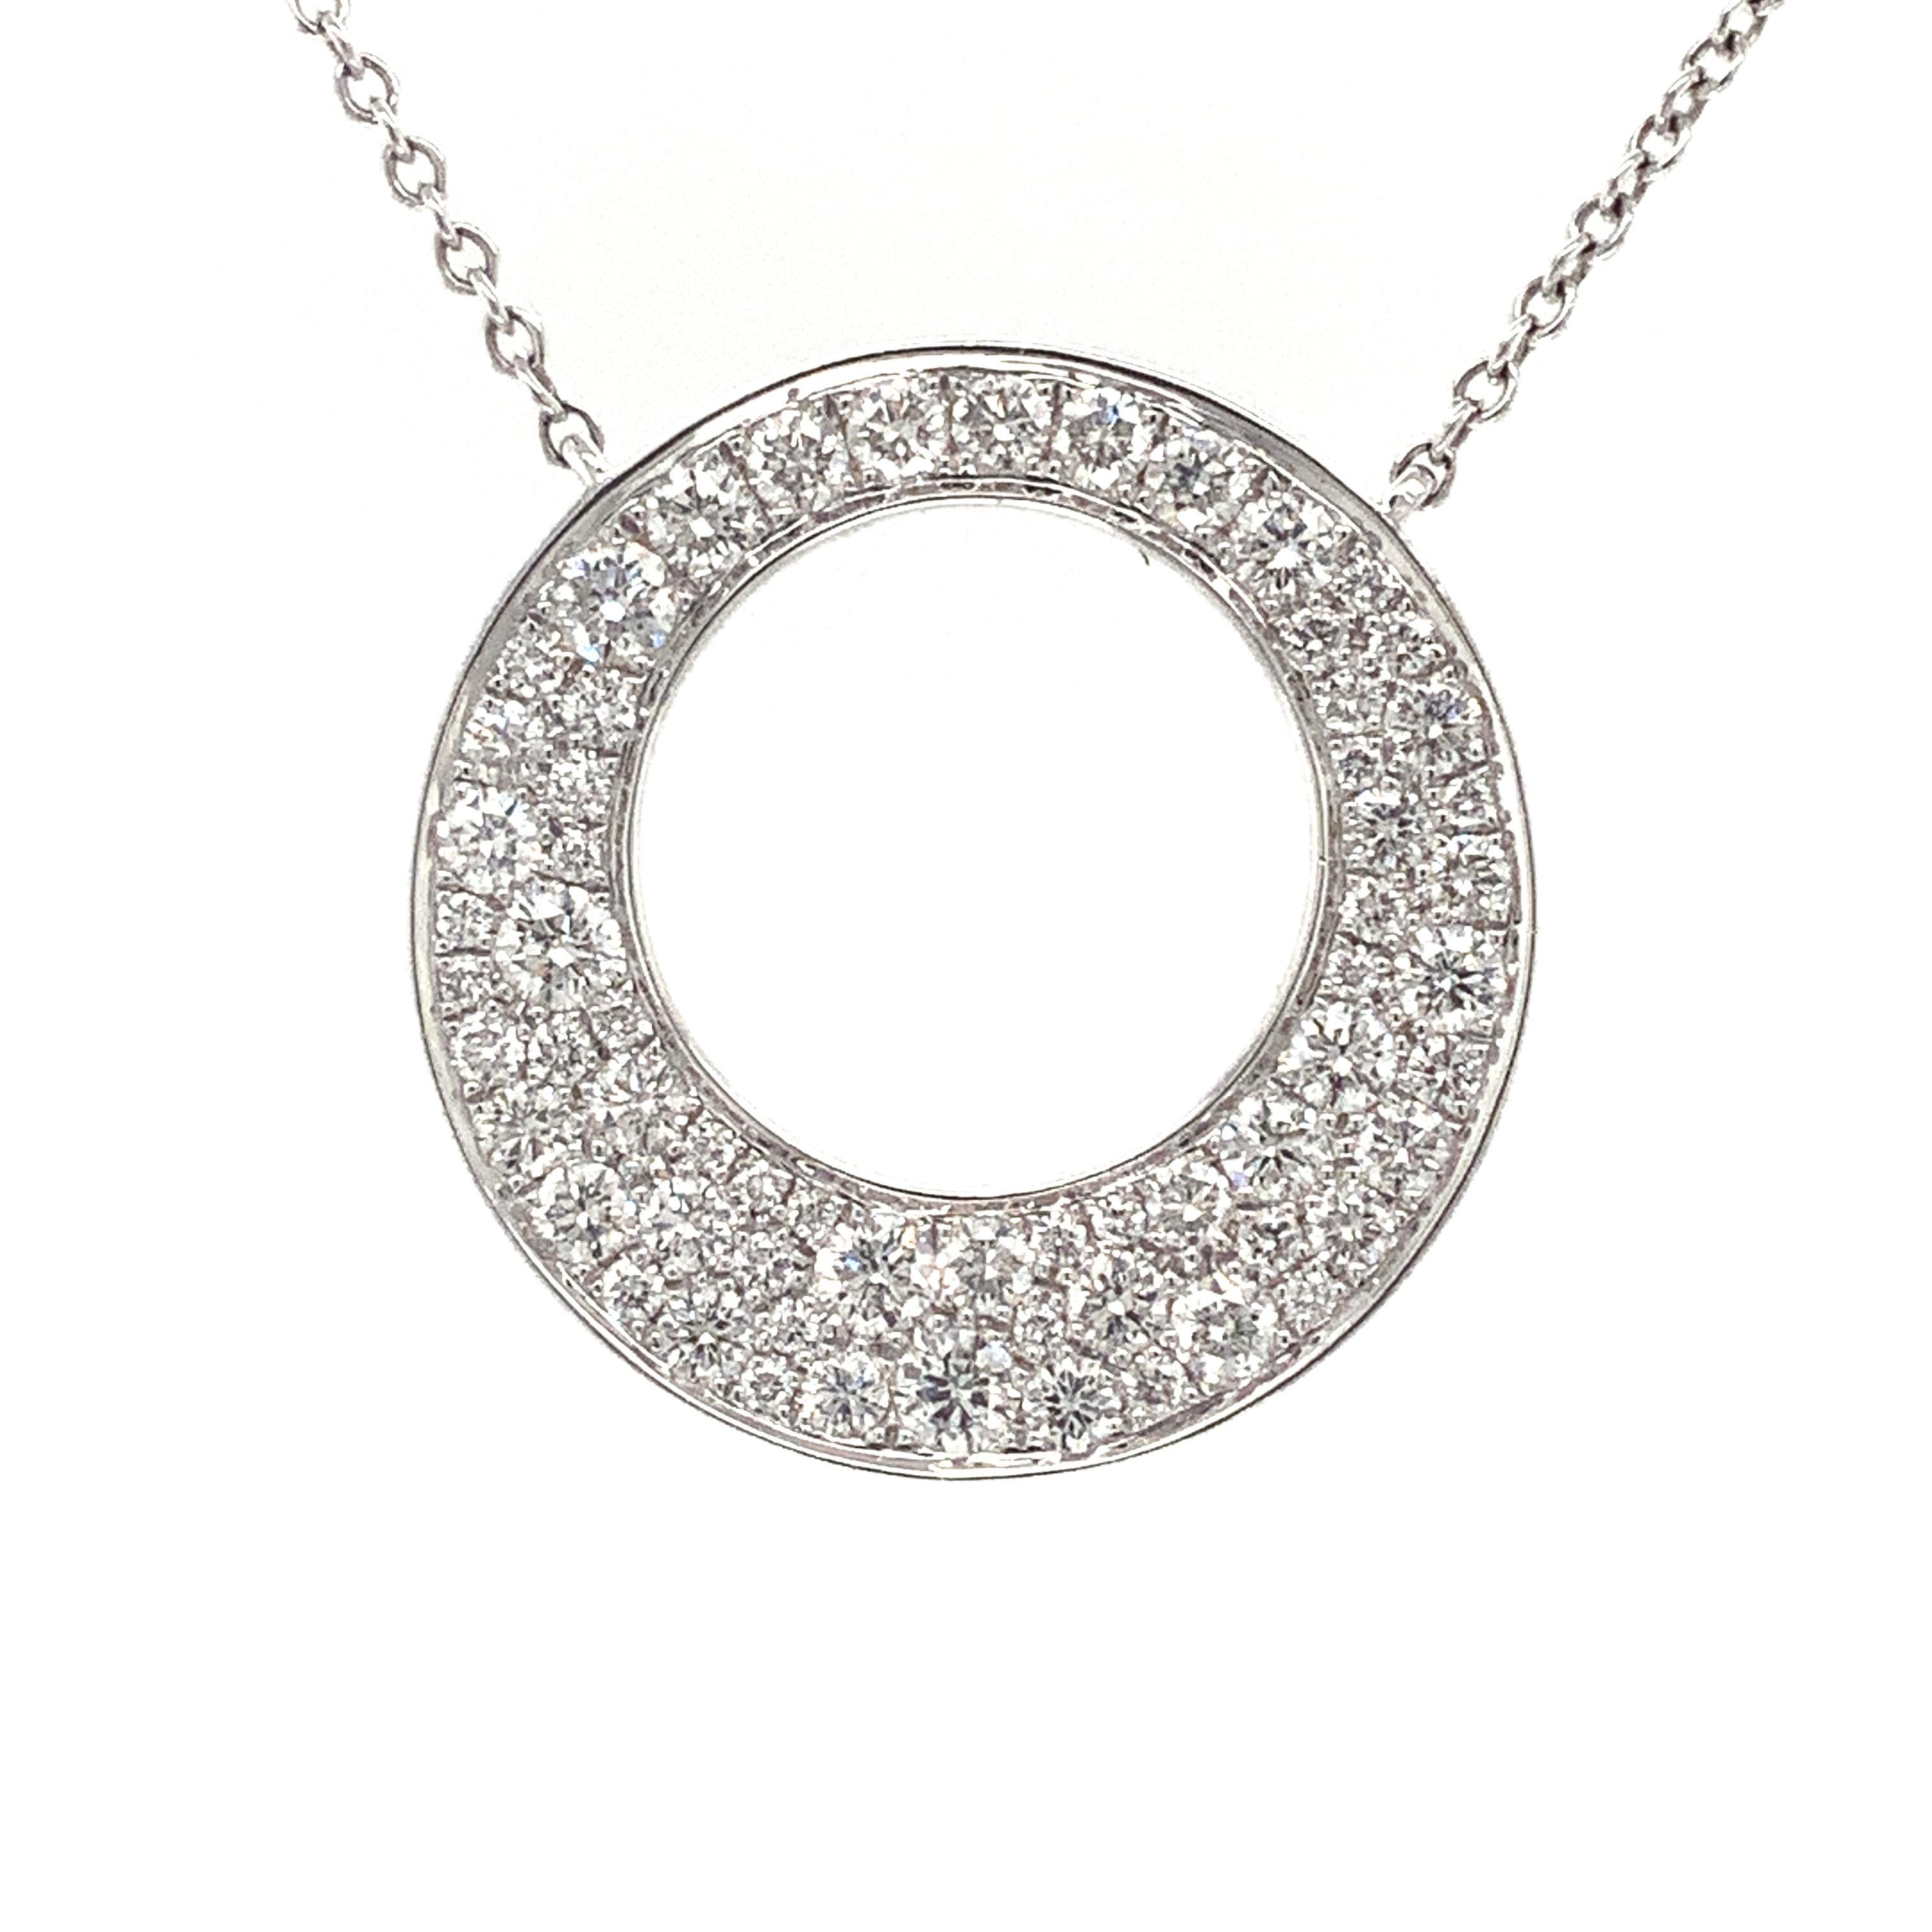 This Memoire Diamond Circle Pavé Pendant necklace features a total of 62 Round Brilliant Diamonds, amounting to 1.01ctw, set in an 18K White Gold 18